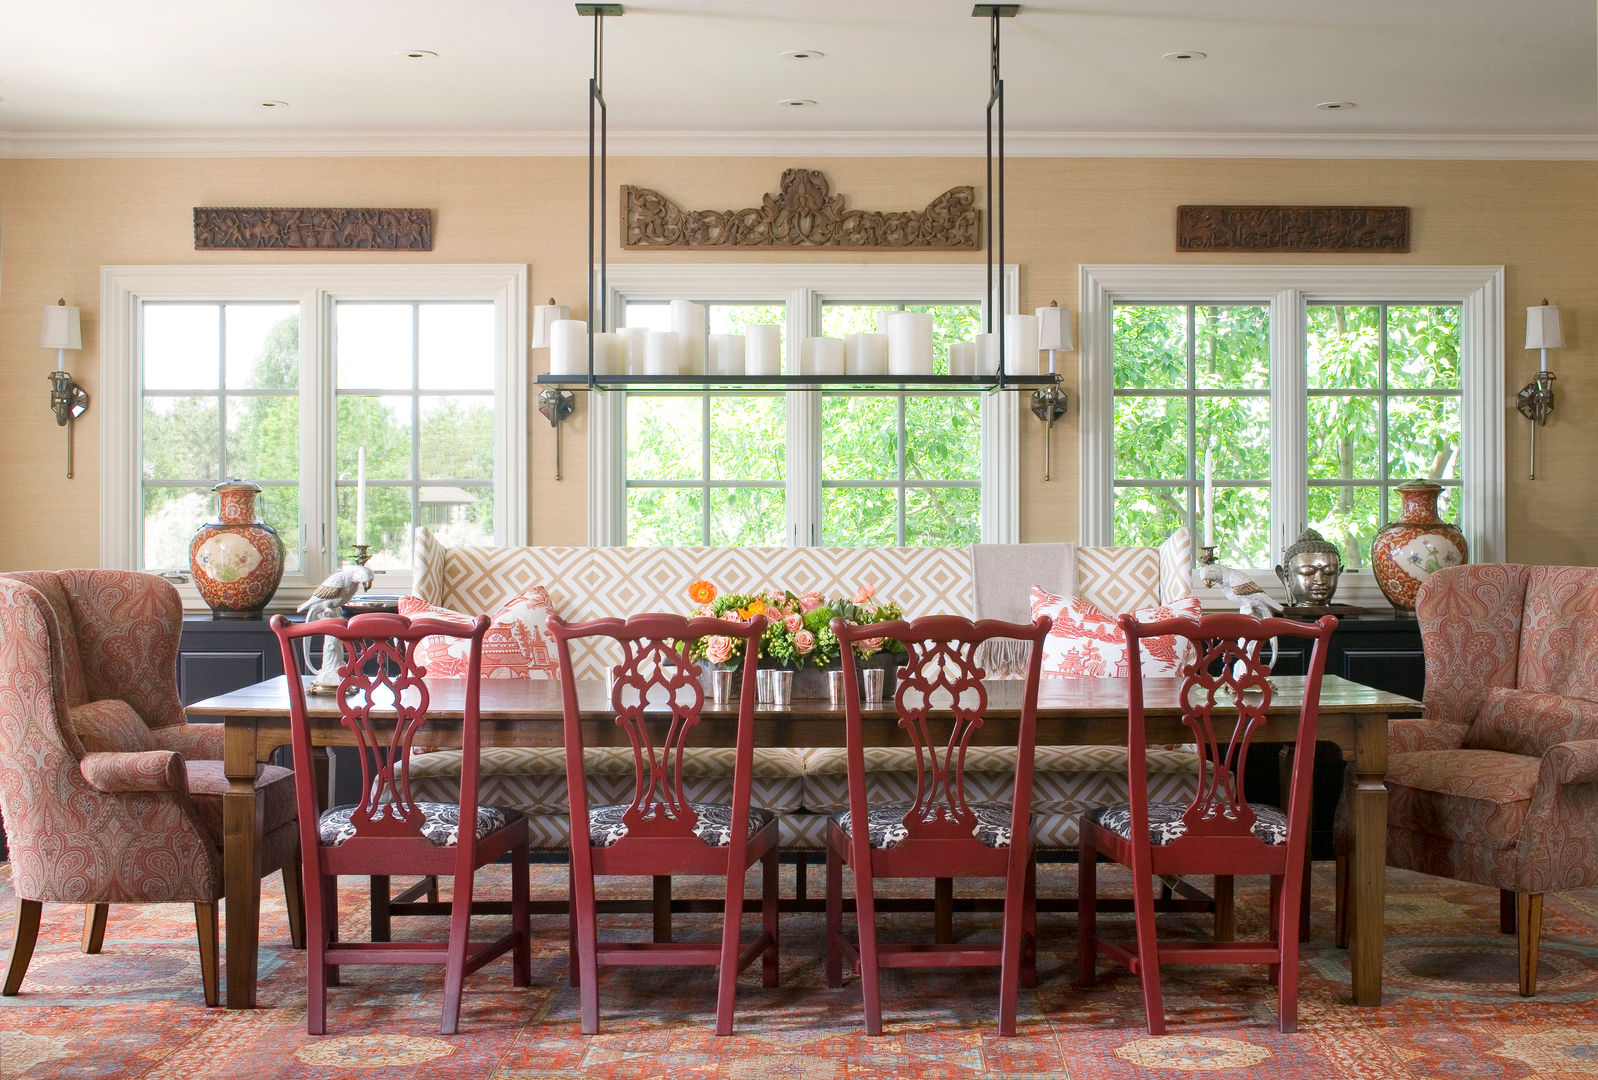 Home of the Year, Andrea Schumacher Interiors Andrea Schumacher Interiors Classic style dining room carved art,chandelier,dining chairs,banquette,area rug,'